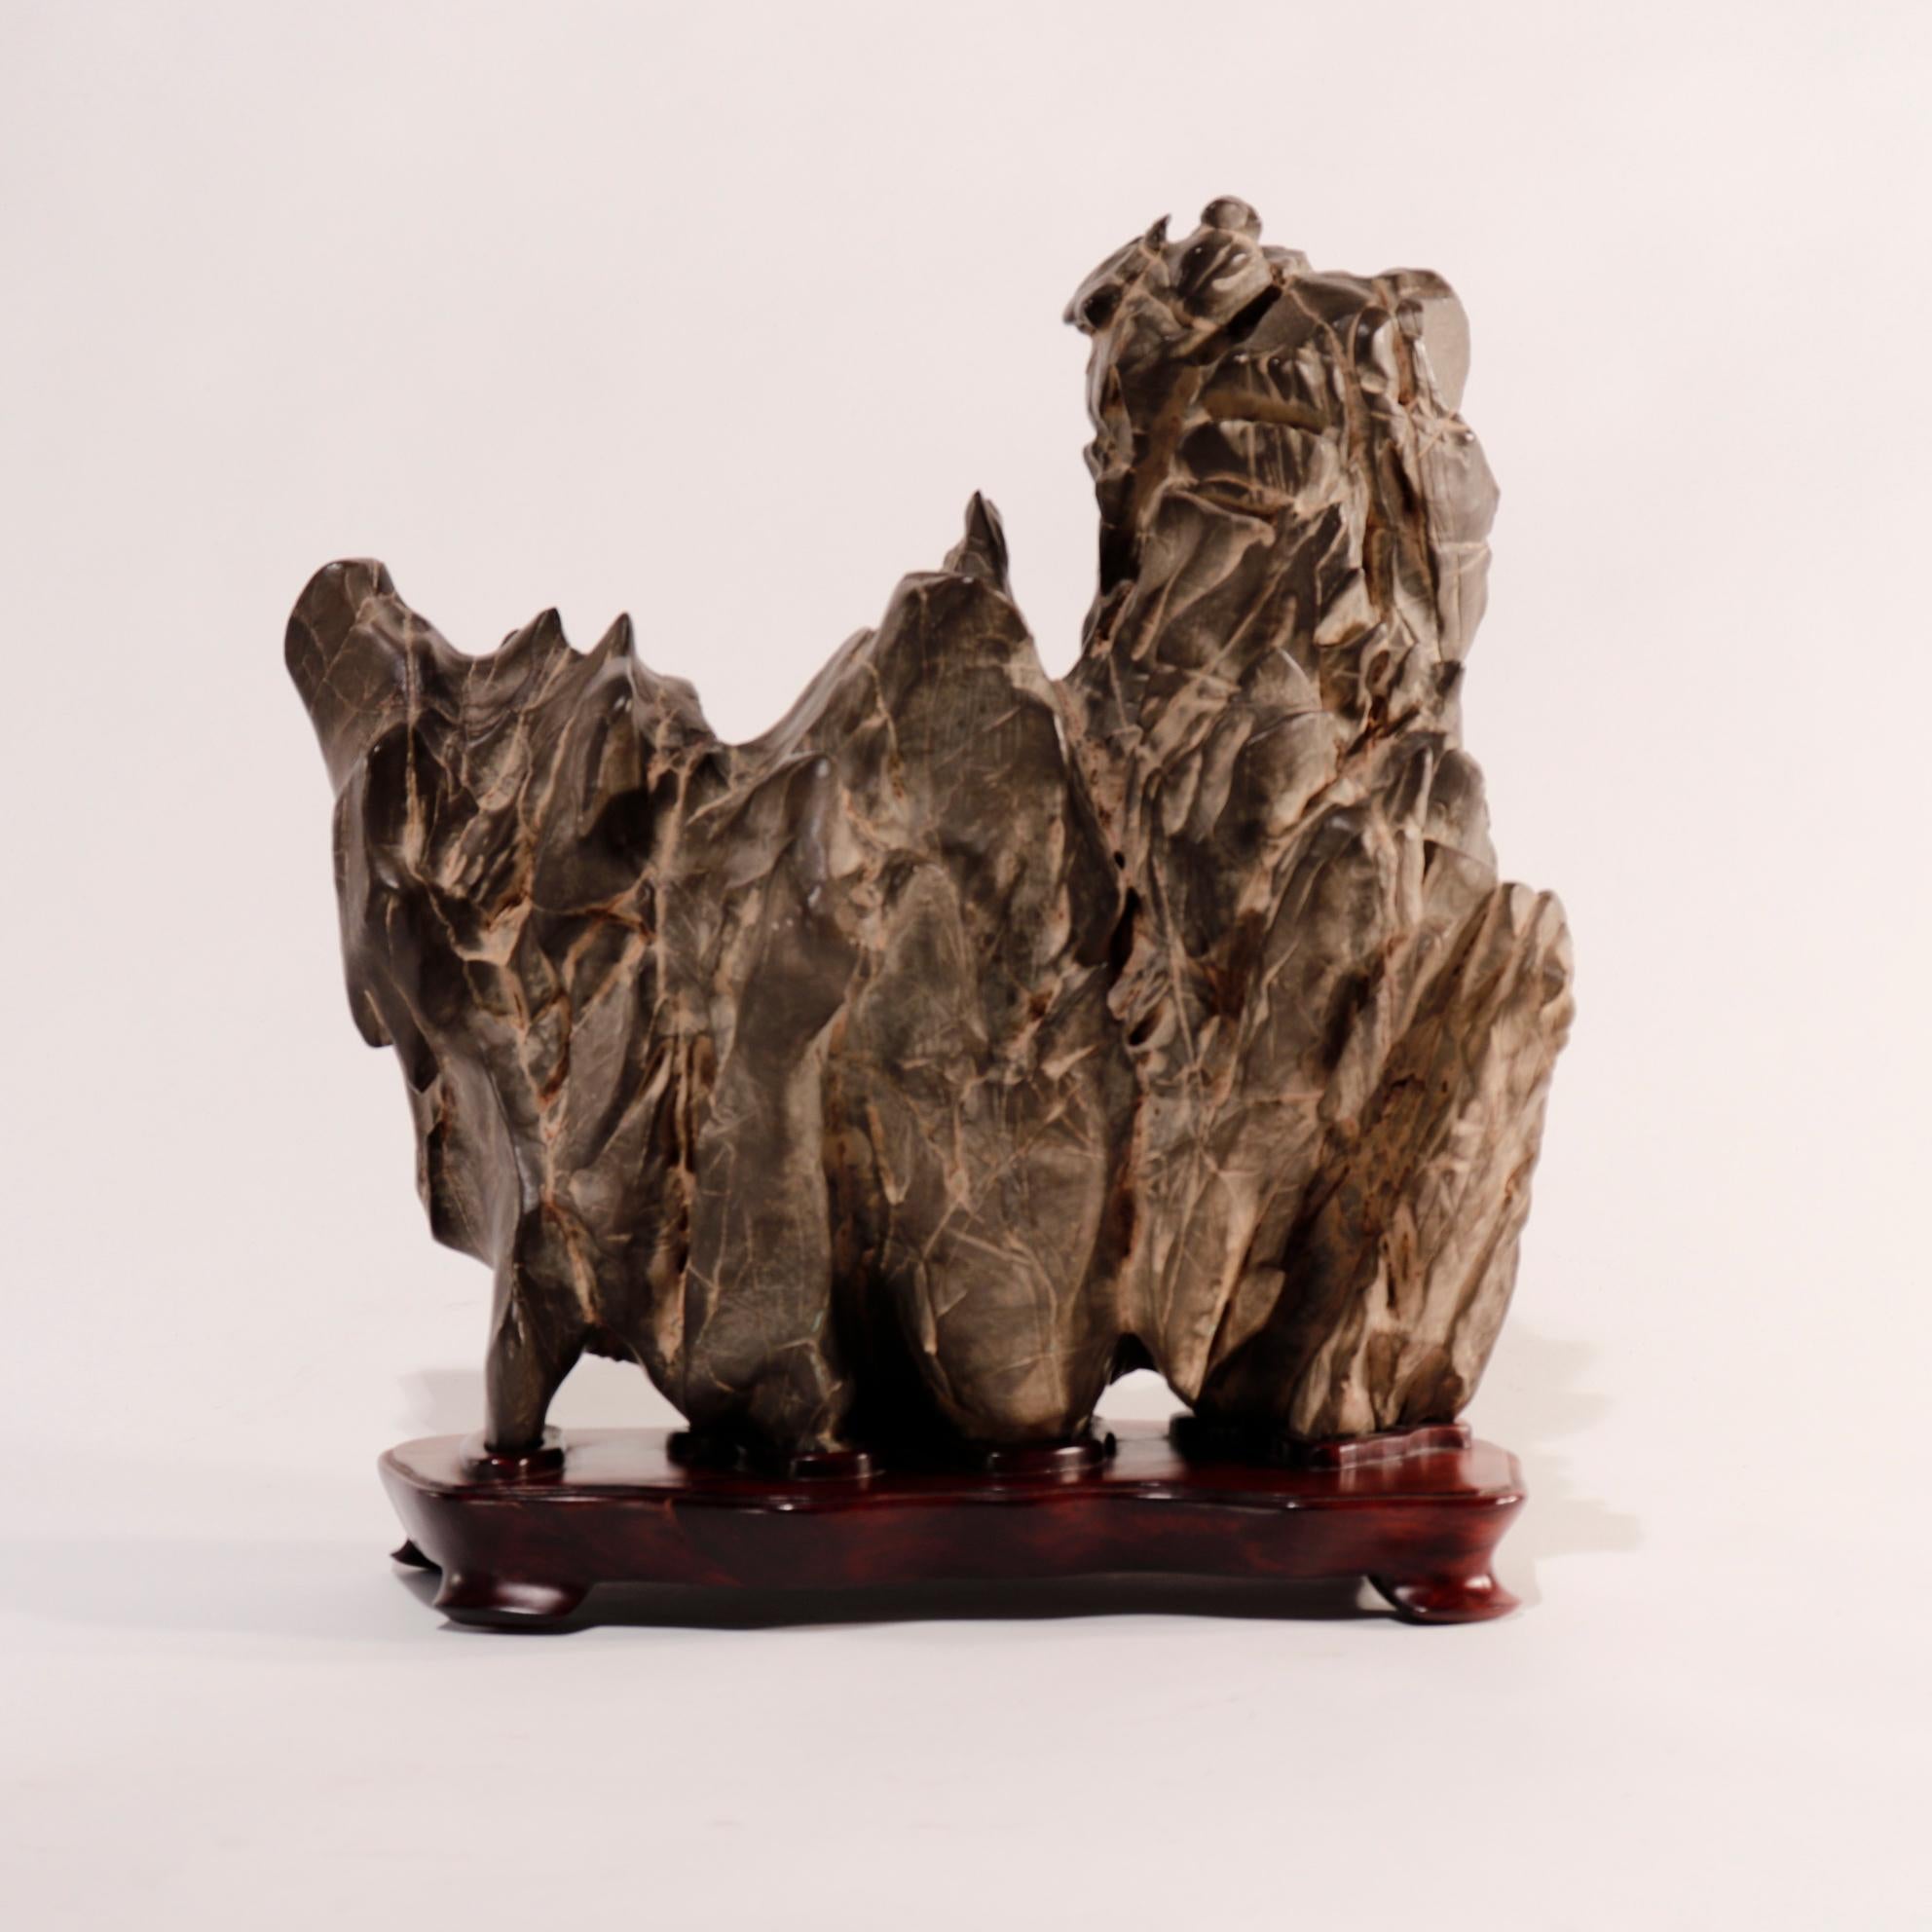 Antique Chinese Gongshi (Scholar’s Rock) In Good Condition For Sale In Point Richmond, CA